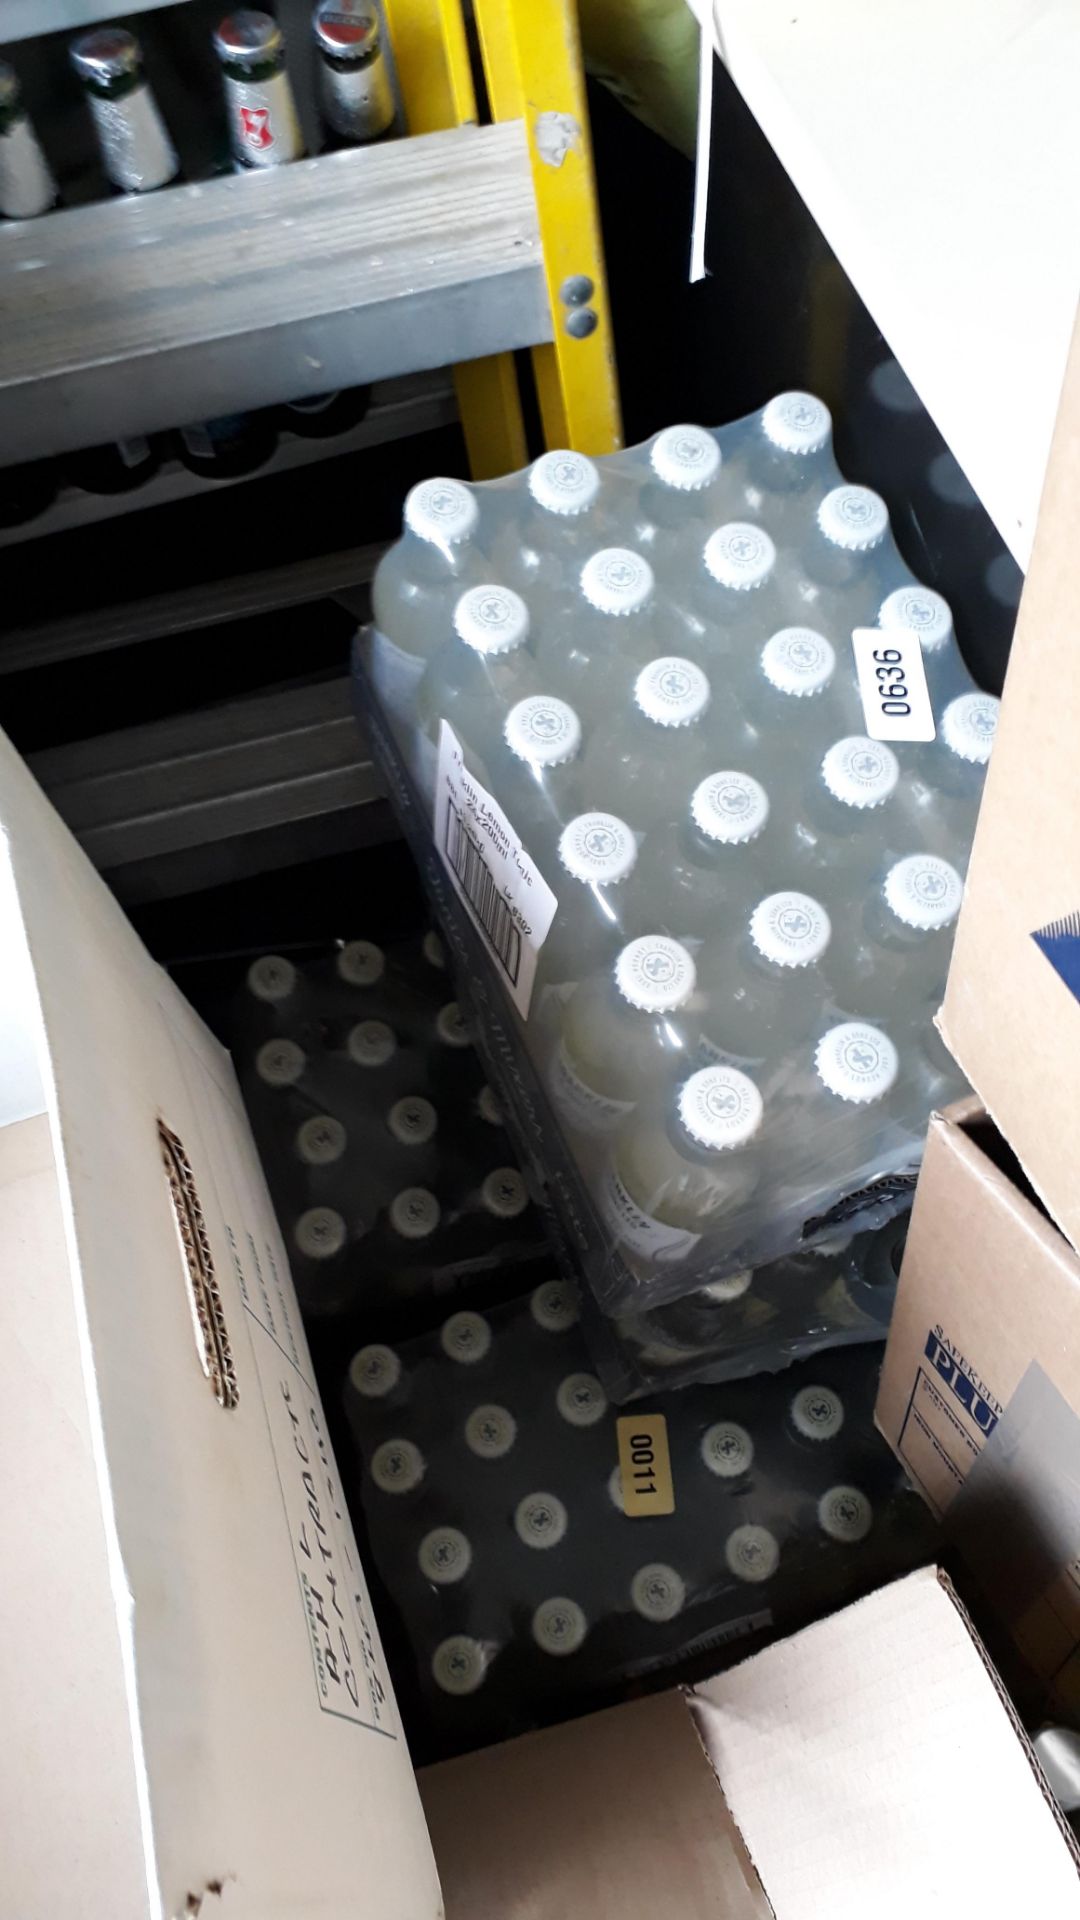 Large Quantity of Alcohol and Beverage Stock - Image 110 of 117